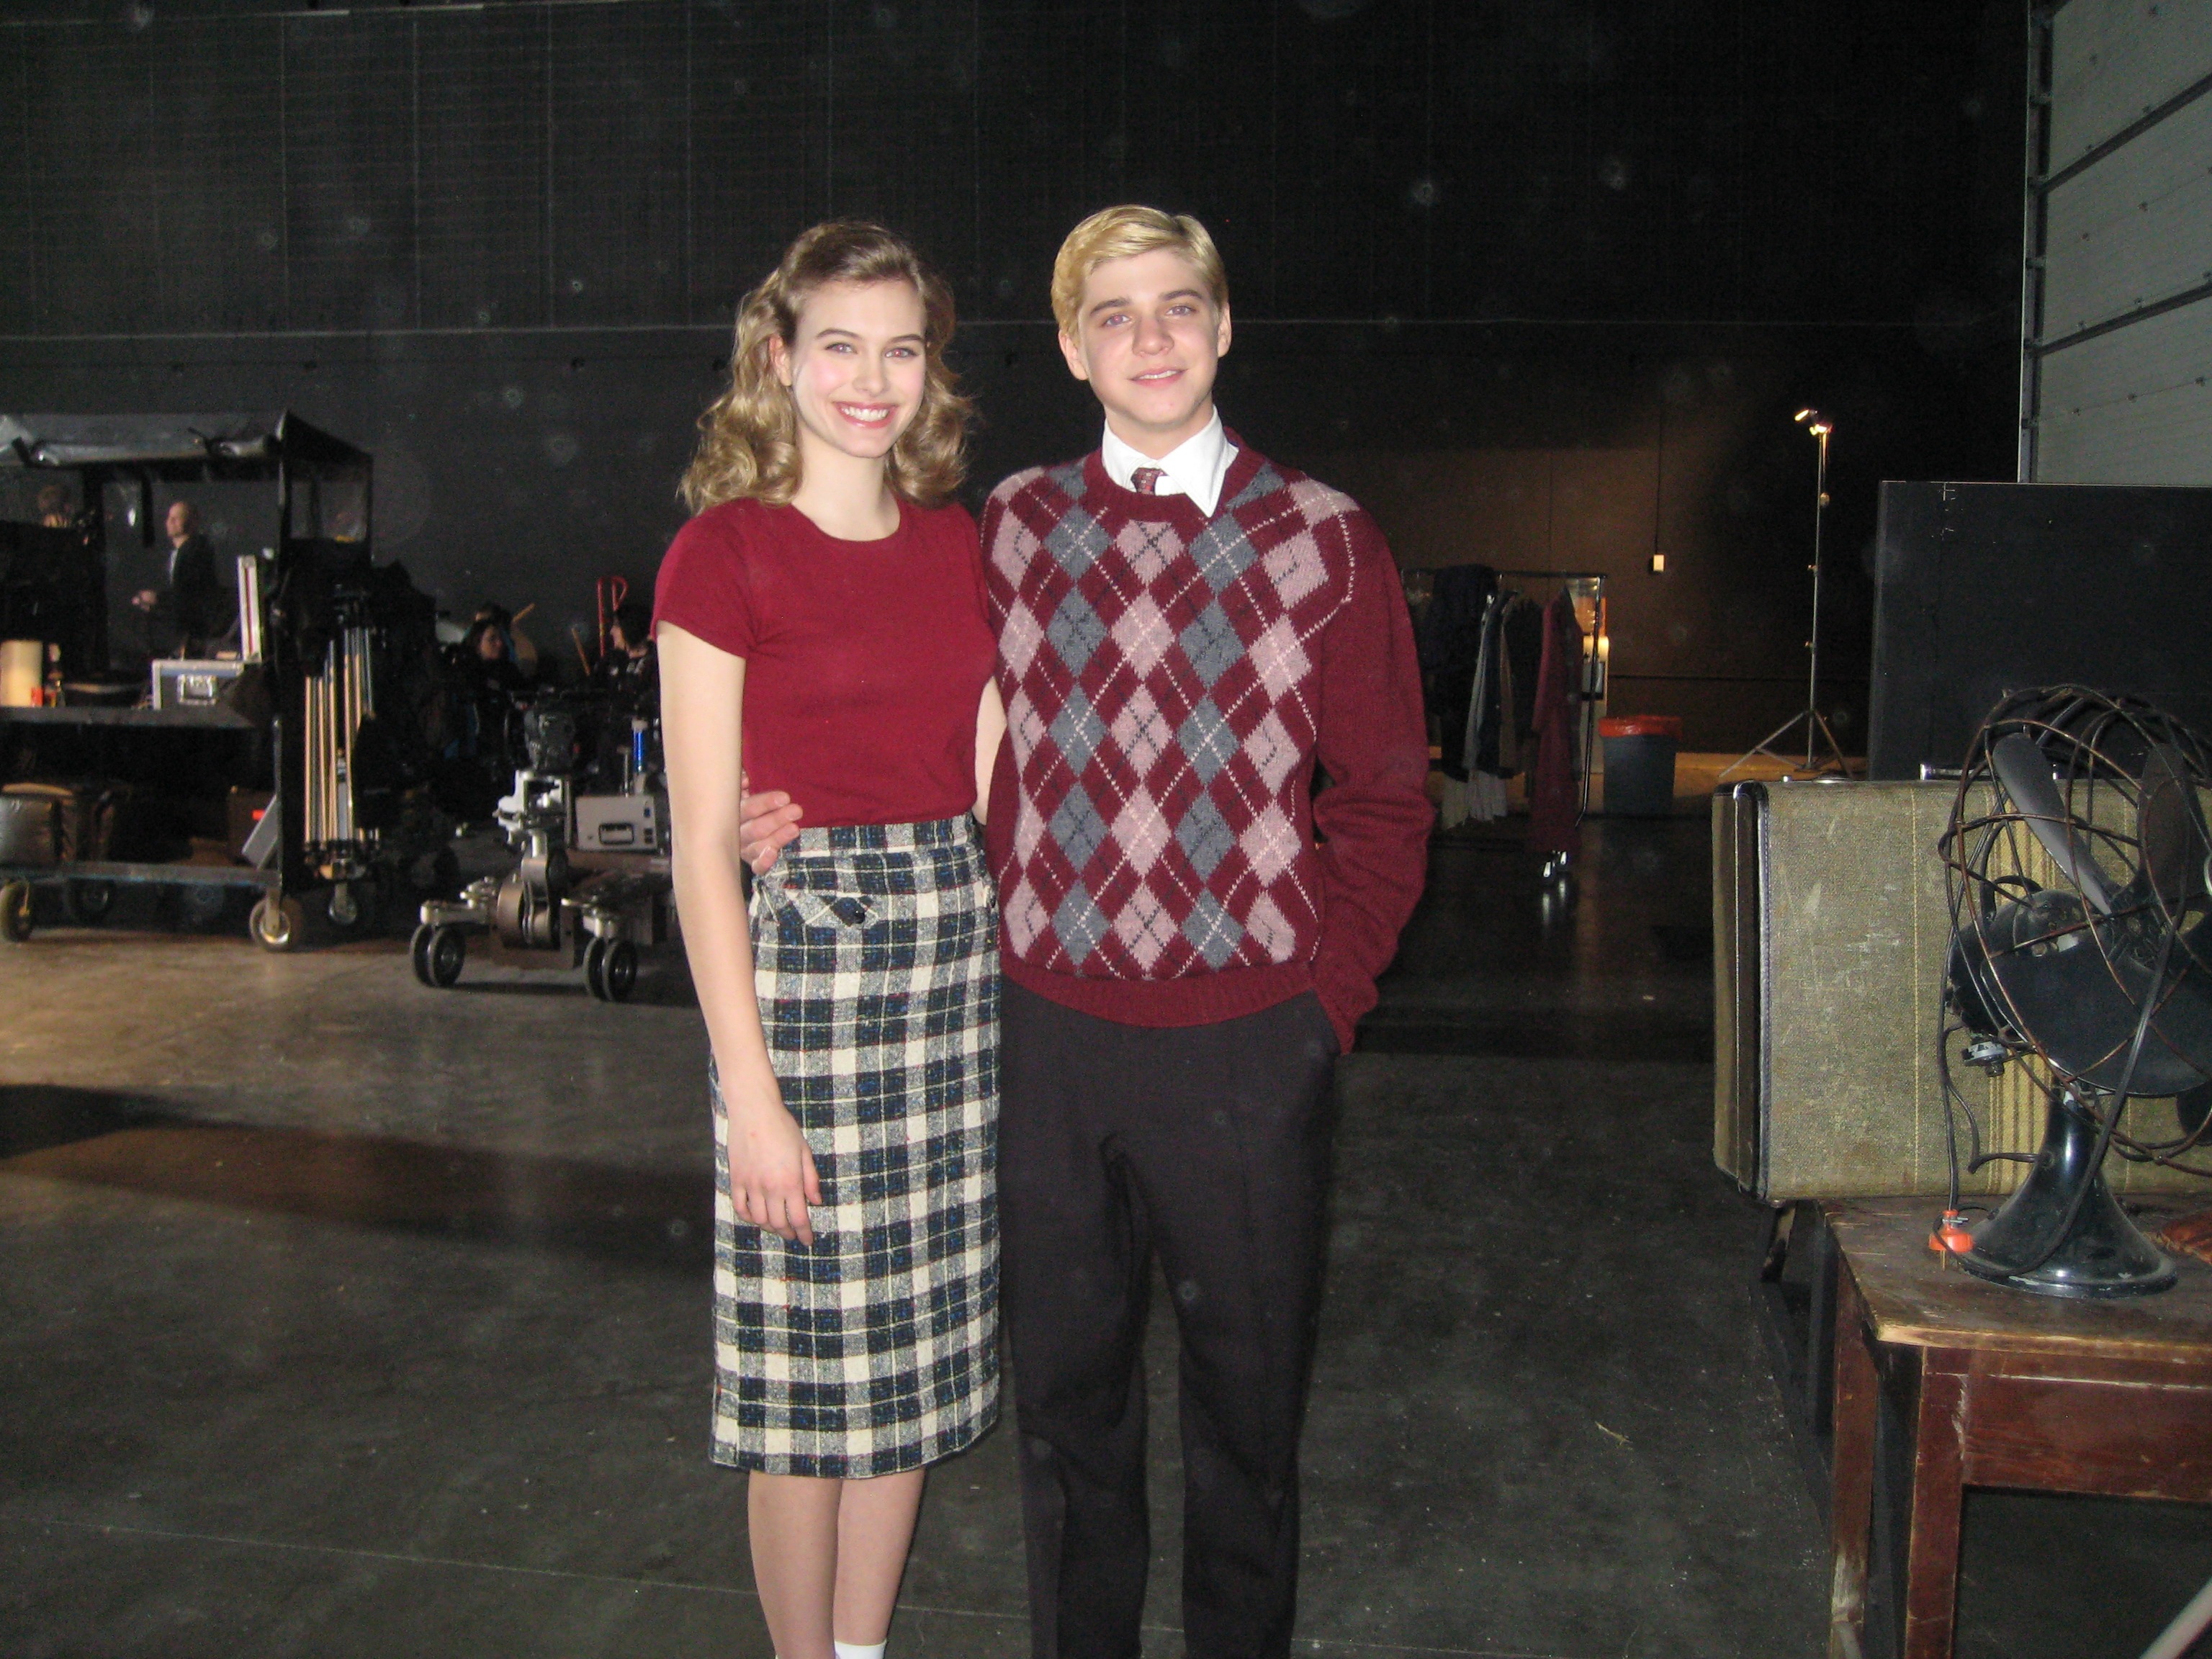 Tiera with Braeden Lemasters on the set of A Christmas Story 2.